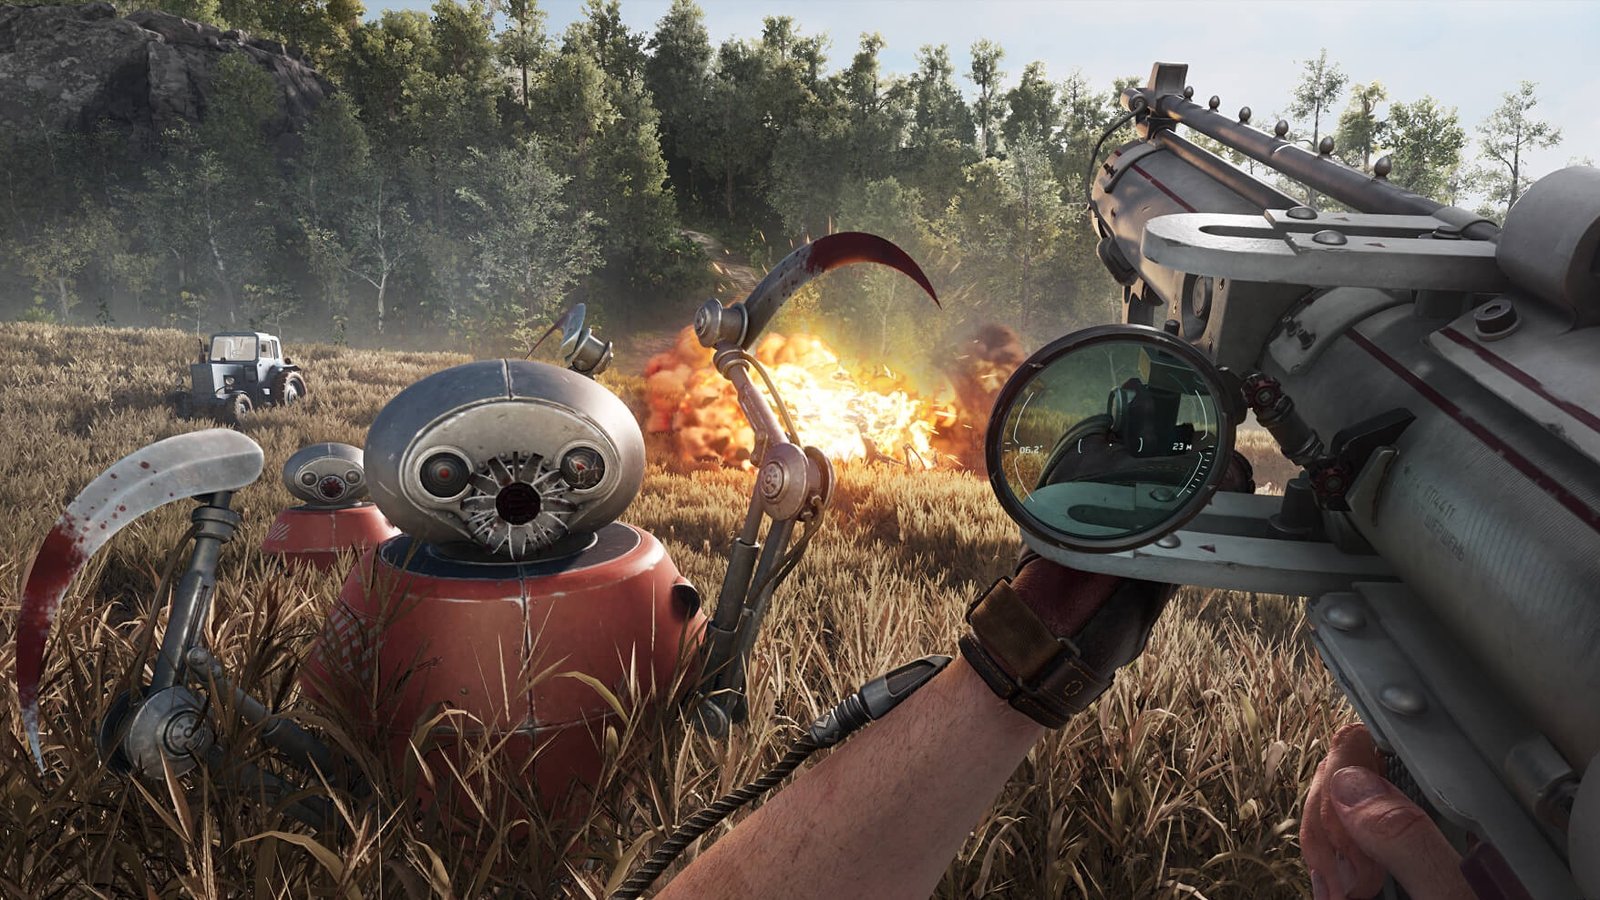 Atomic Heart - In first person, the main character holds a rocket launcher pointed at approaching robots with scythe arms while an explosion goes off in a field behind them.